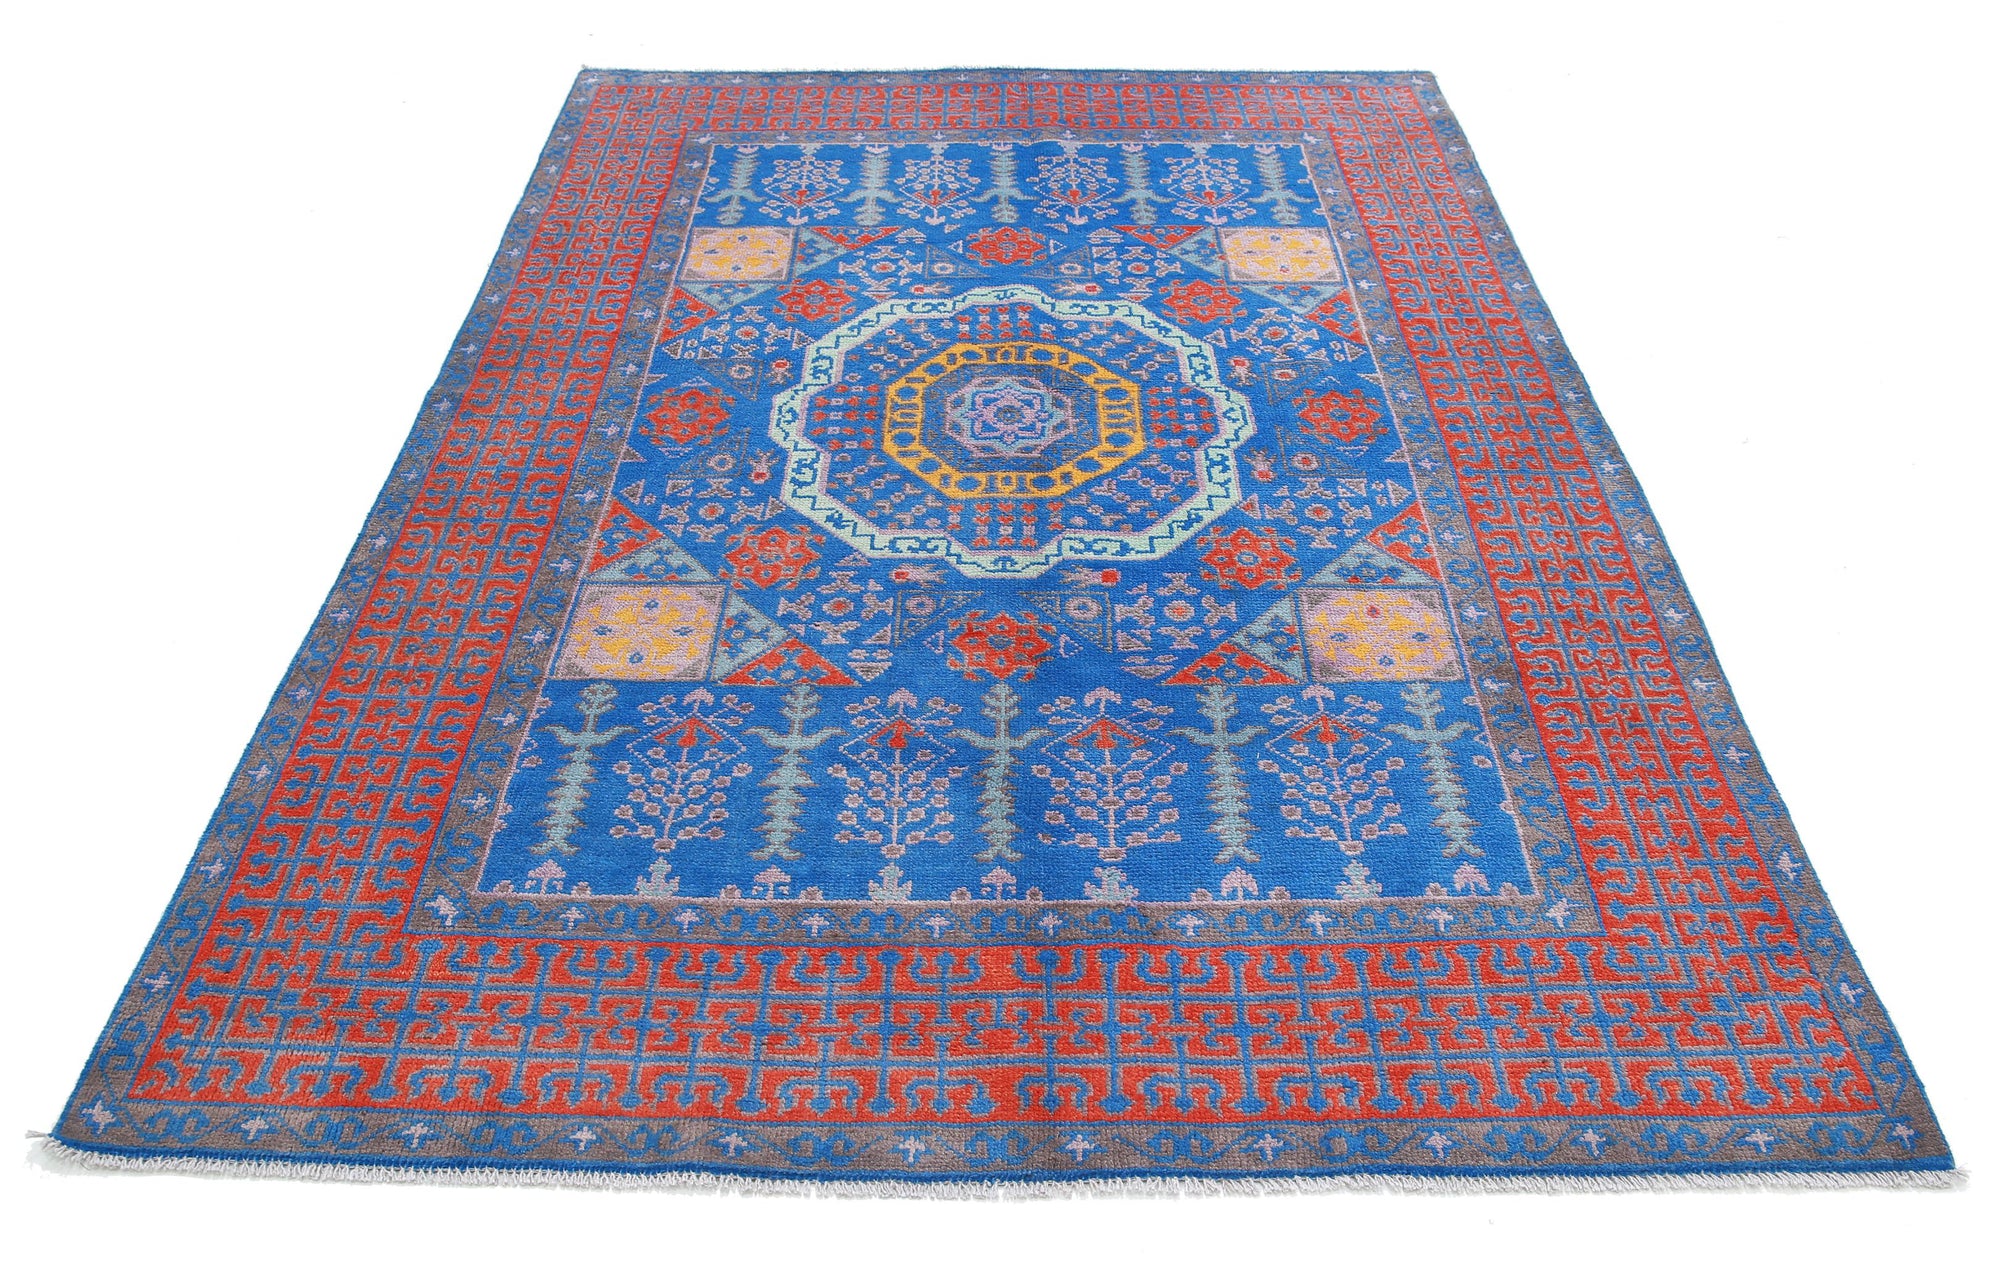 Revival-hand-knotted-qarghani-wool-rug-5014225-3.jpg